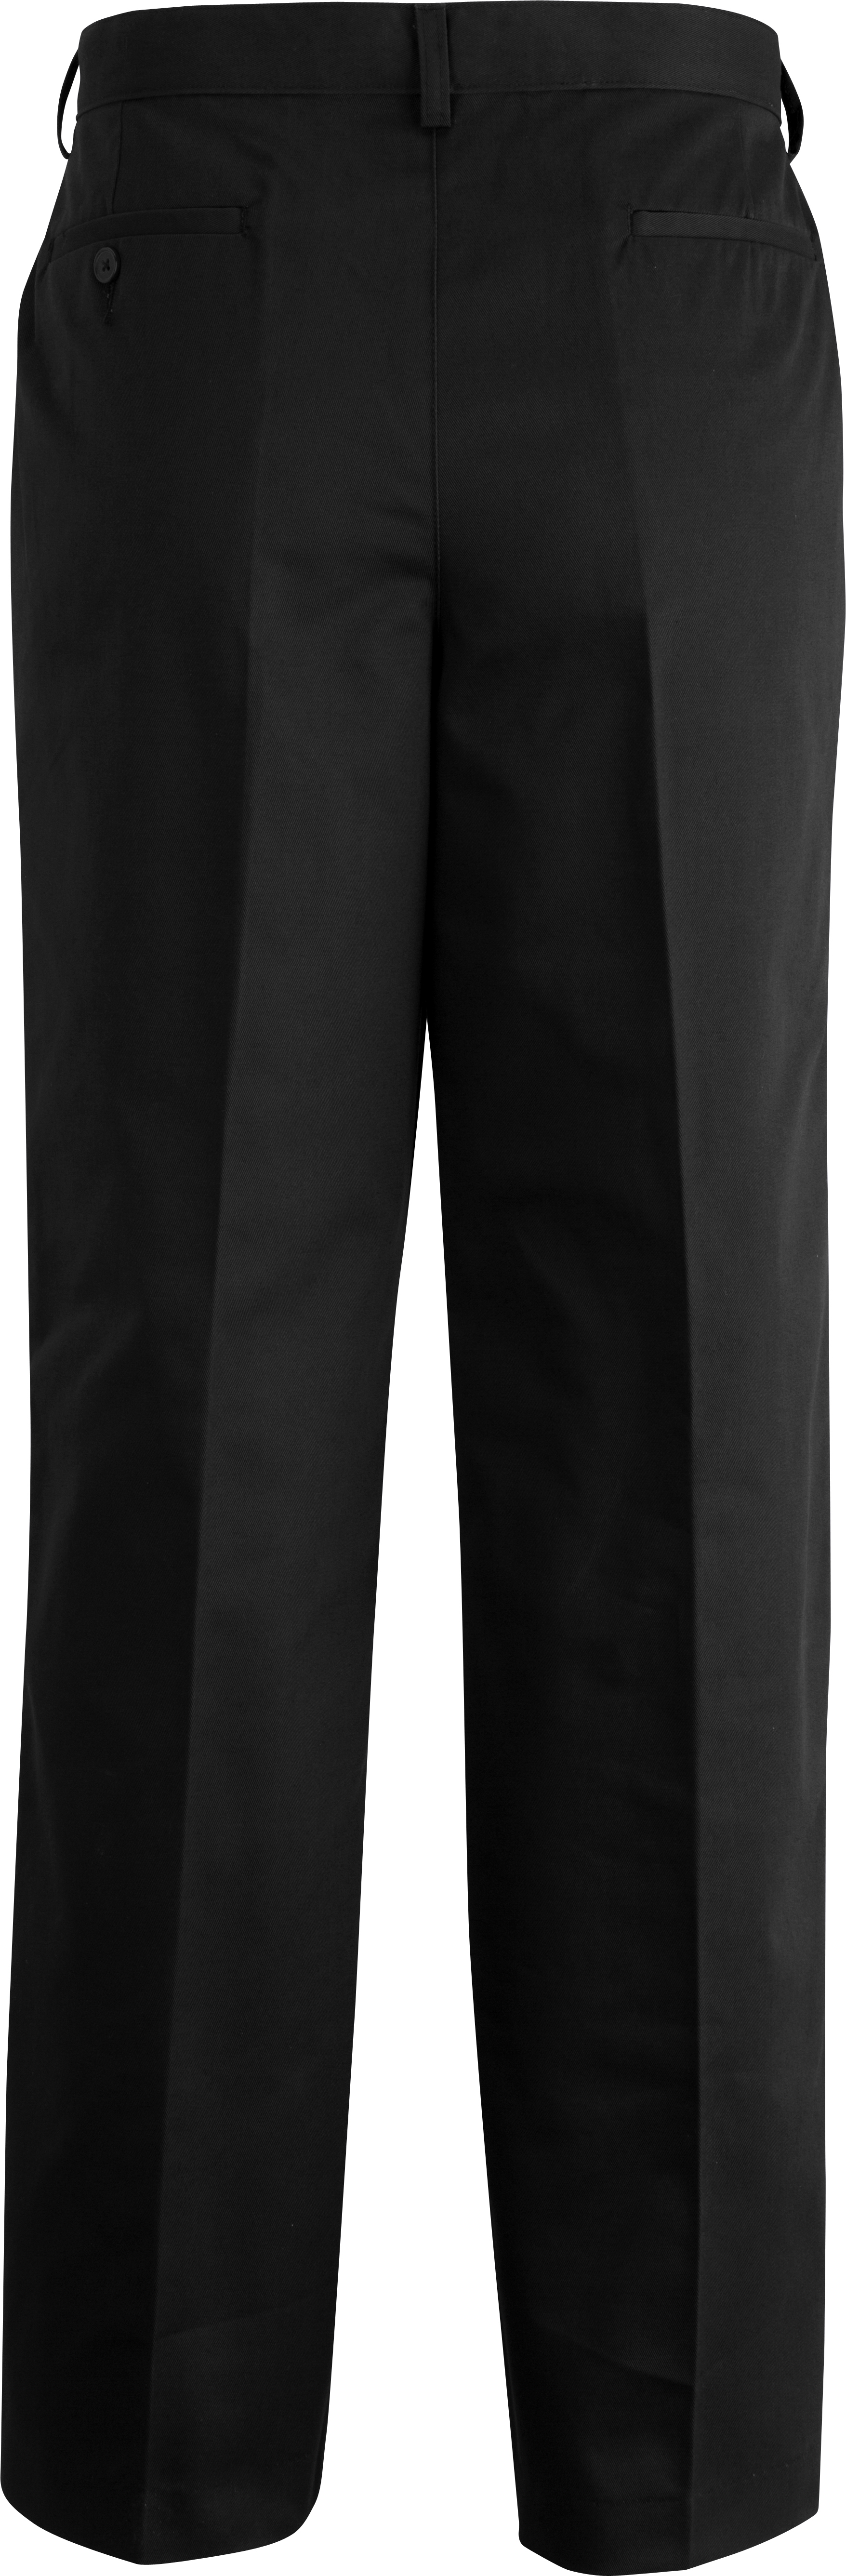 UTILITY CHINO PLEATED FRONT PANT